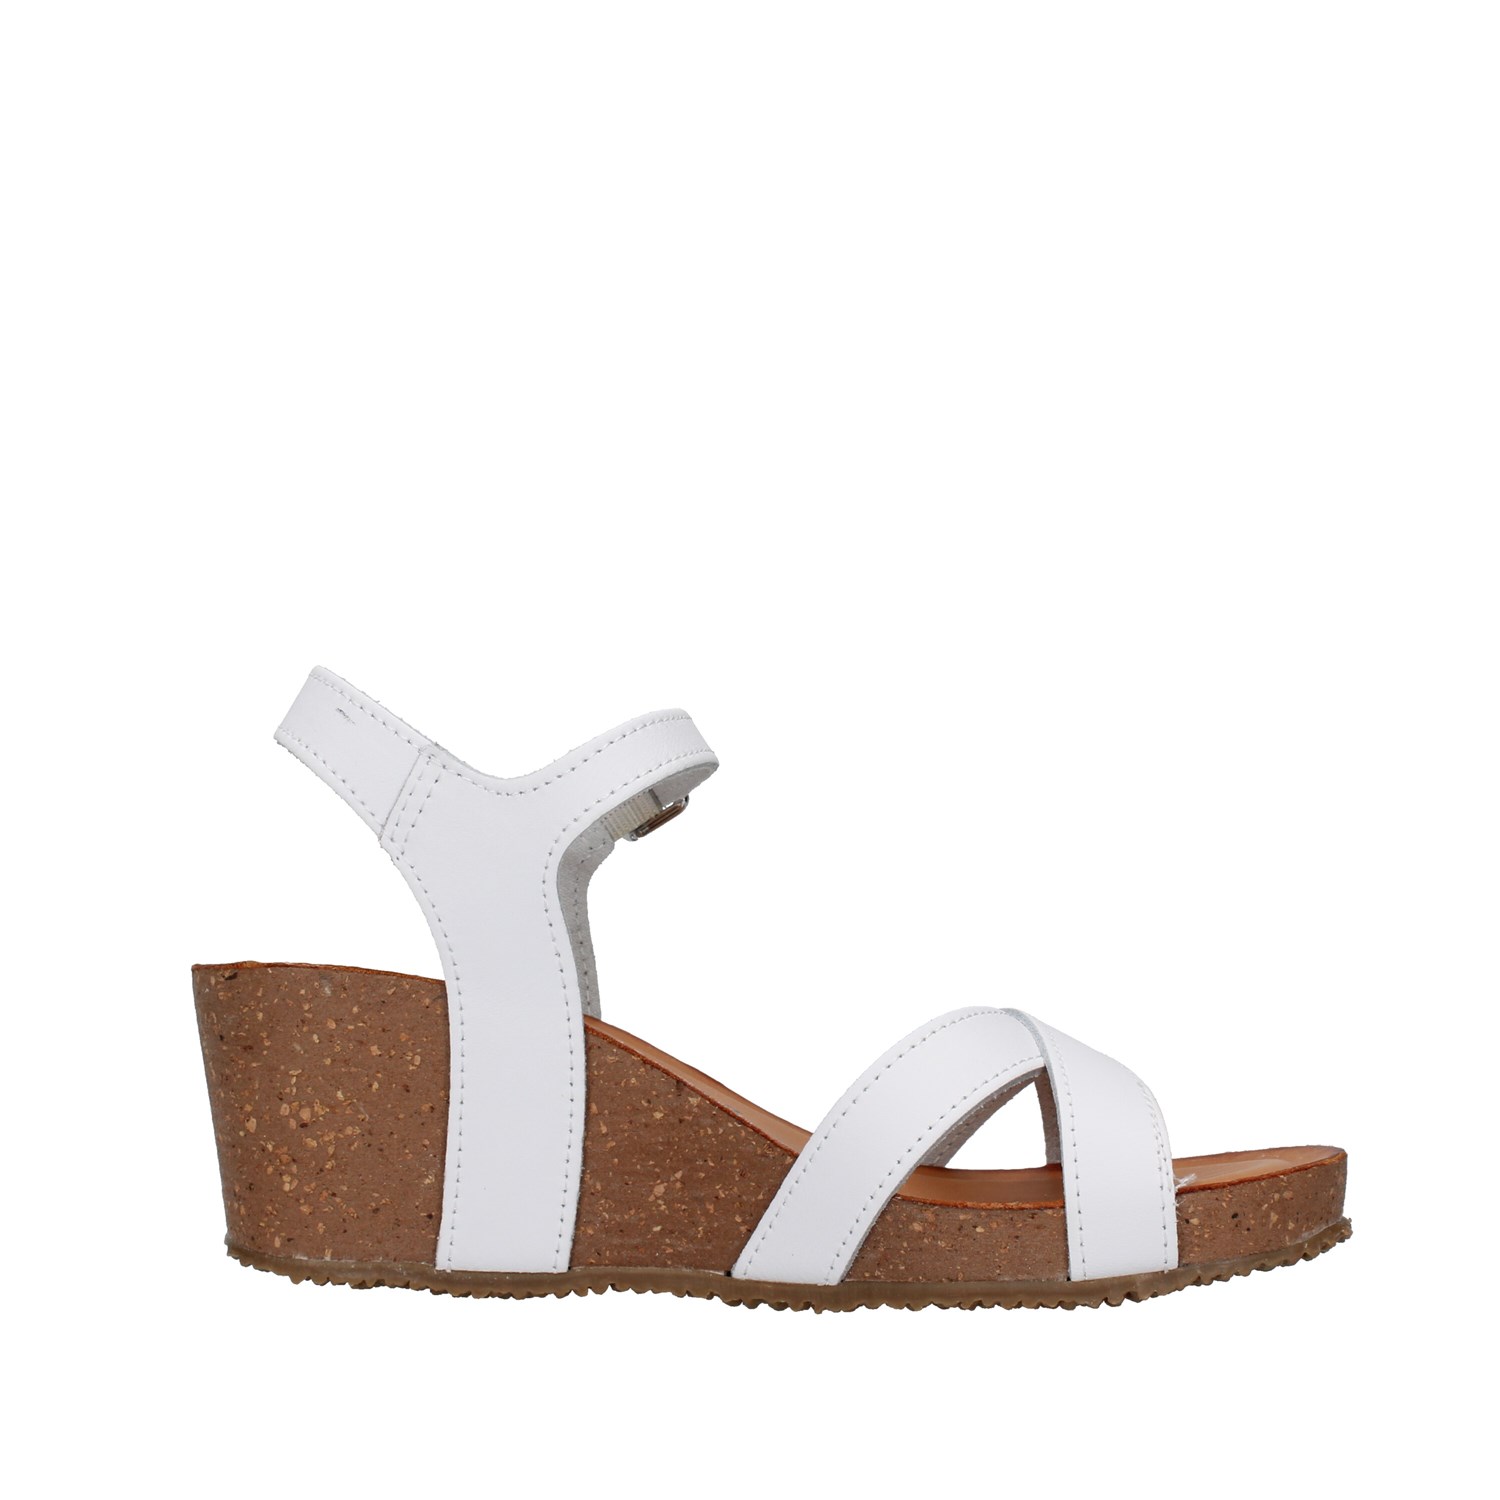 Bionatura Shoes Woman With wedge WHITE 37A870